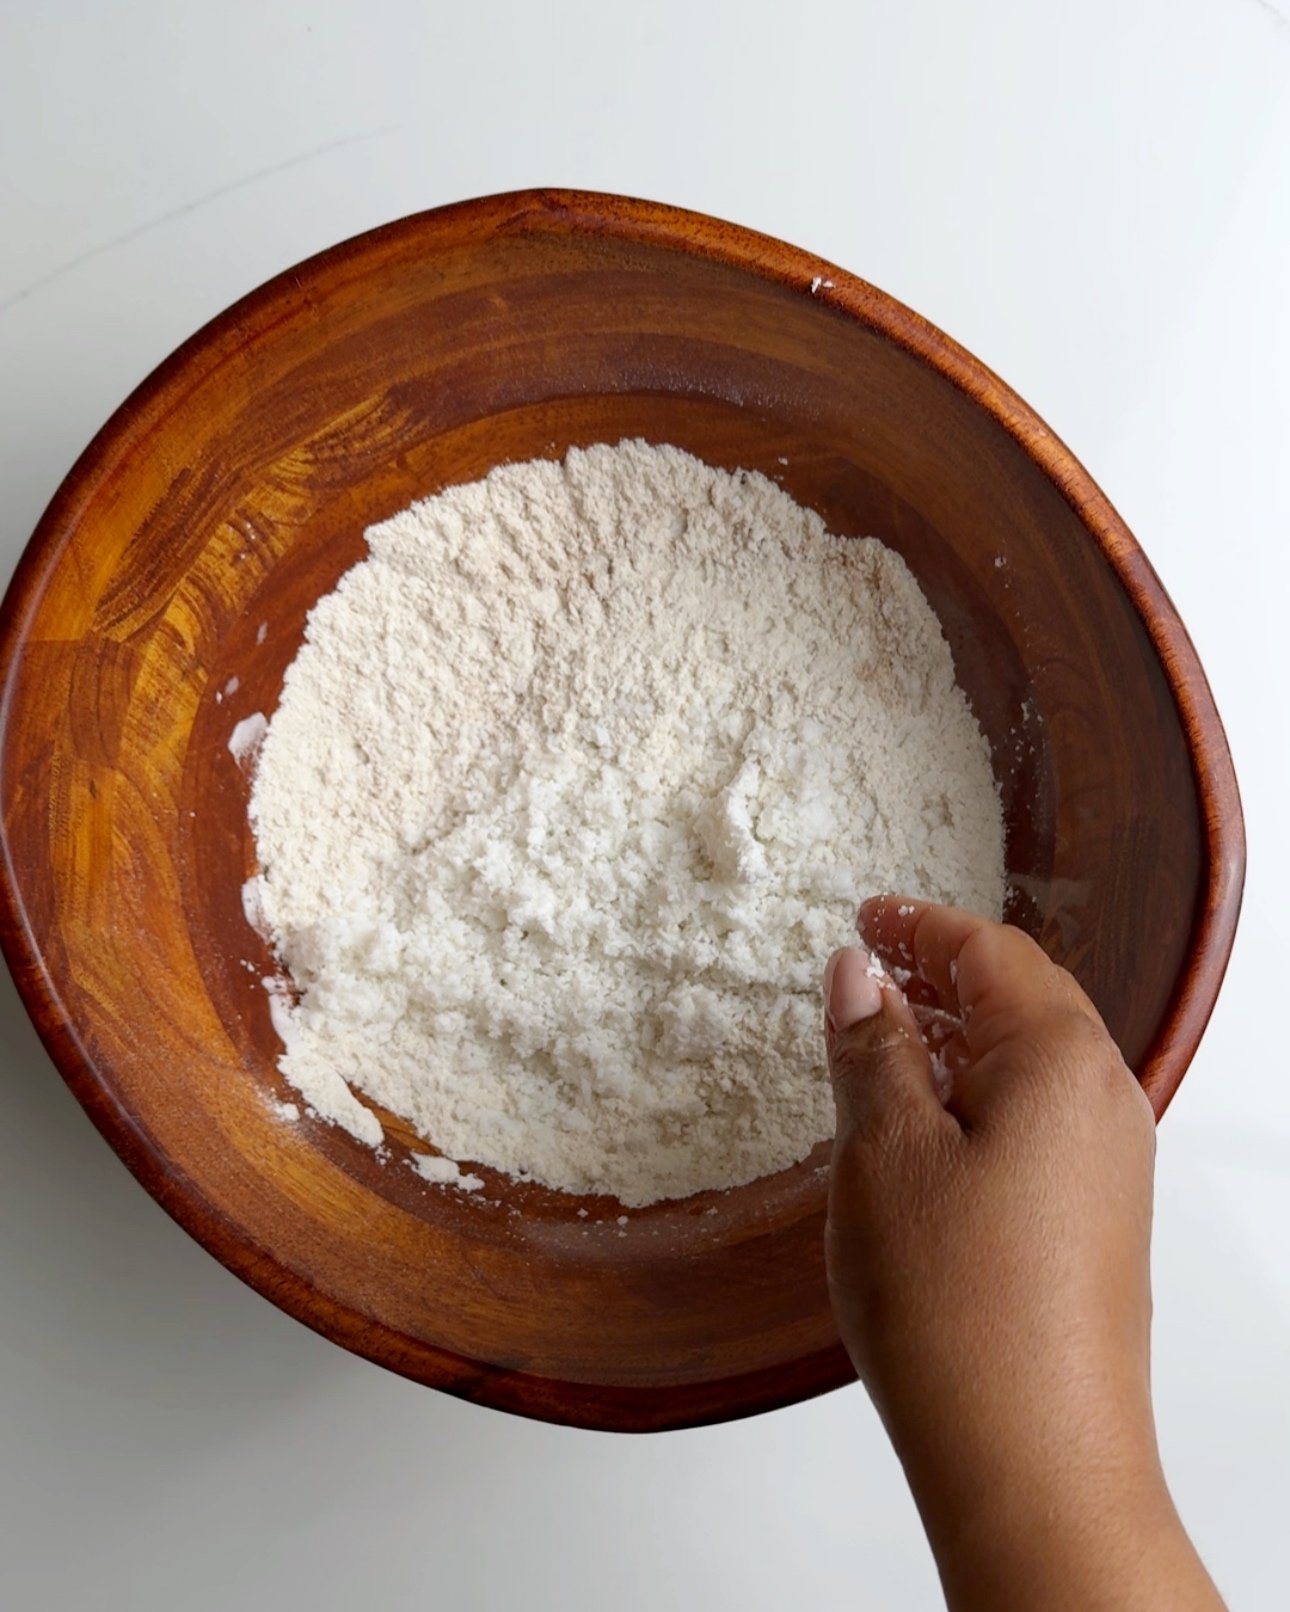 Dry ingredients mixed together with coconut on top in a brown wooden bowl